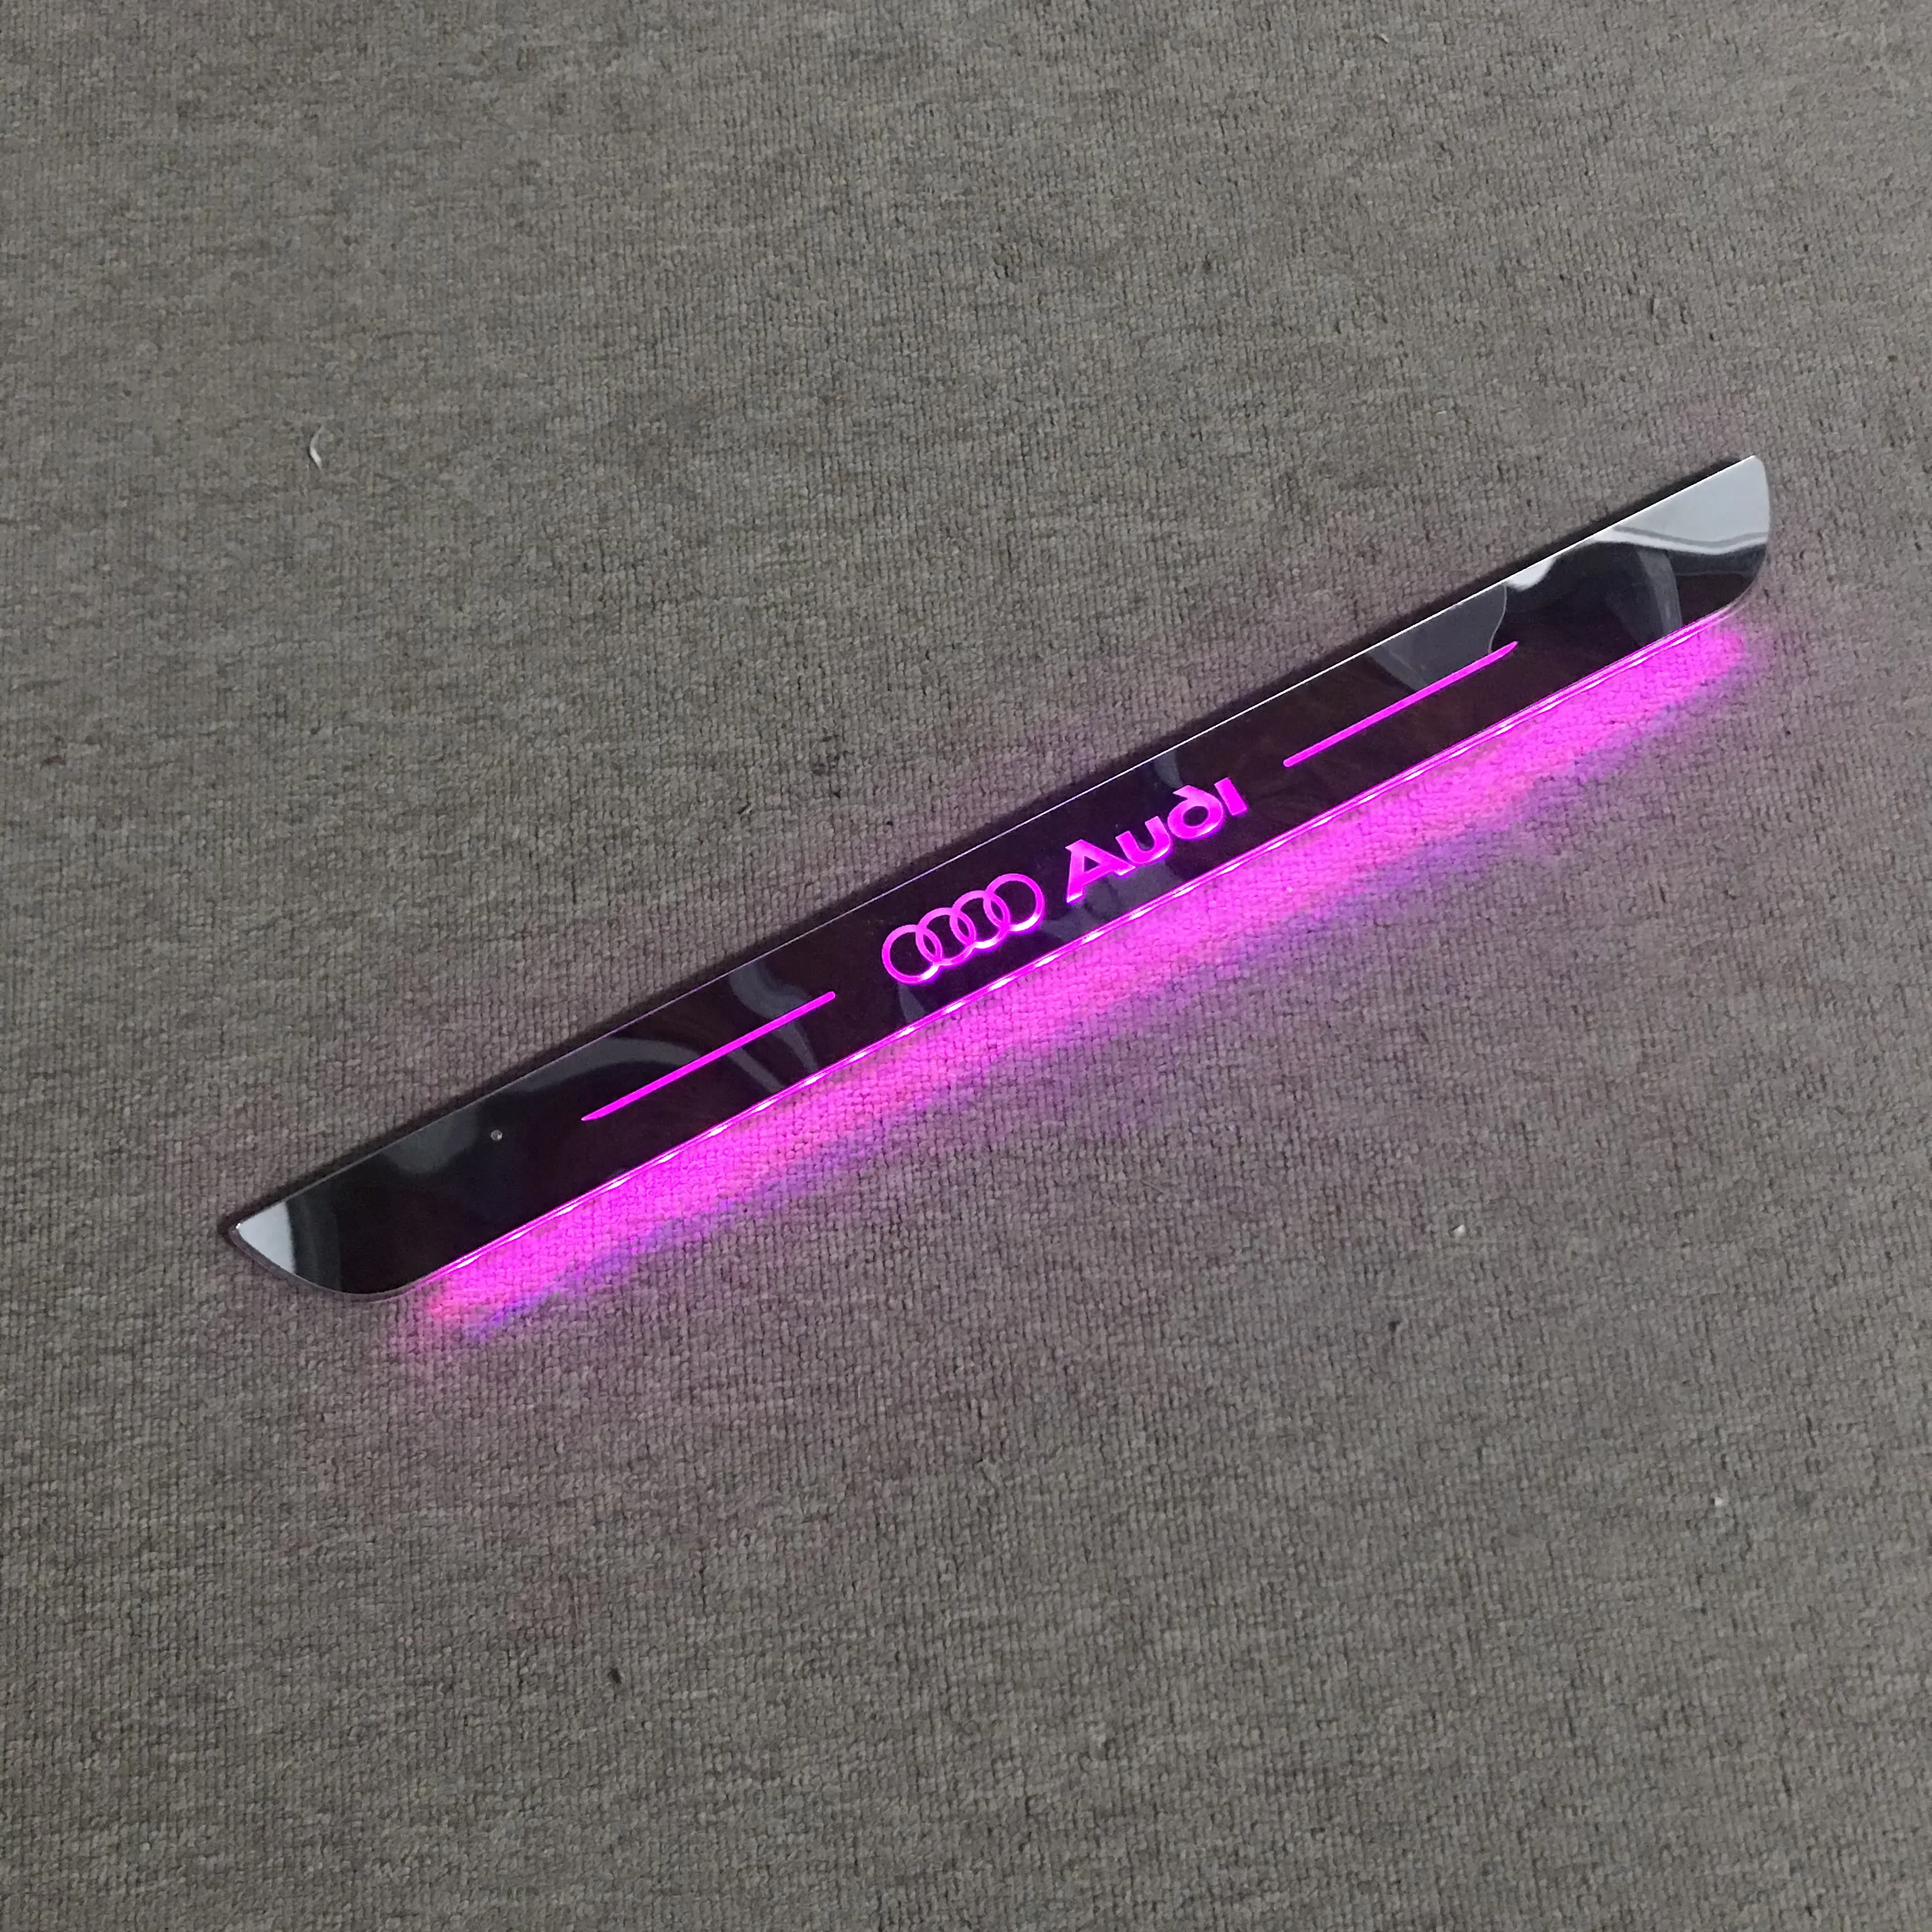 New type of magnetic absorption car foot lamp welcome foot pedal USB rechargeable magnetic absorption colorful lamp manufacturer